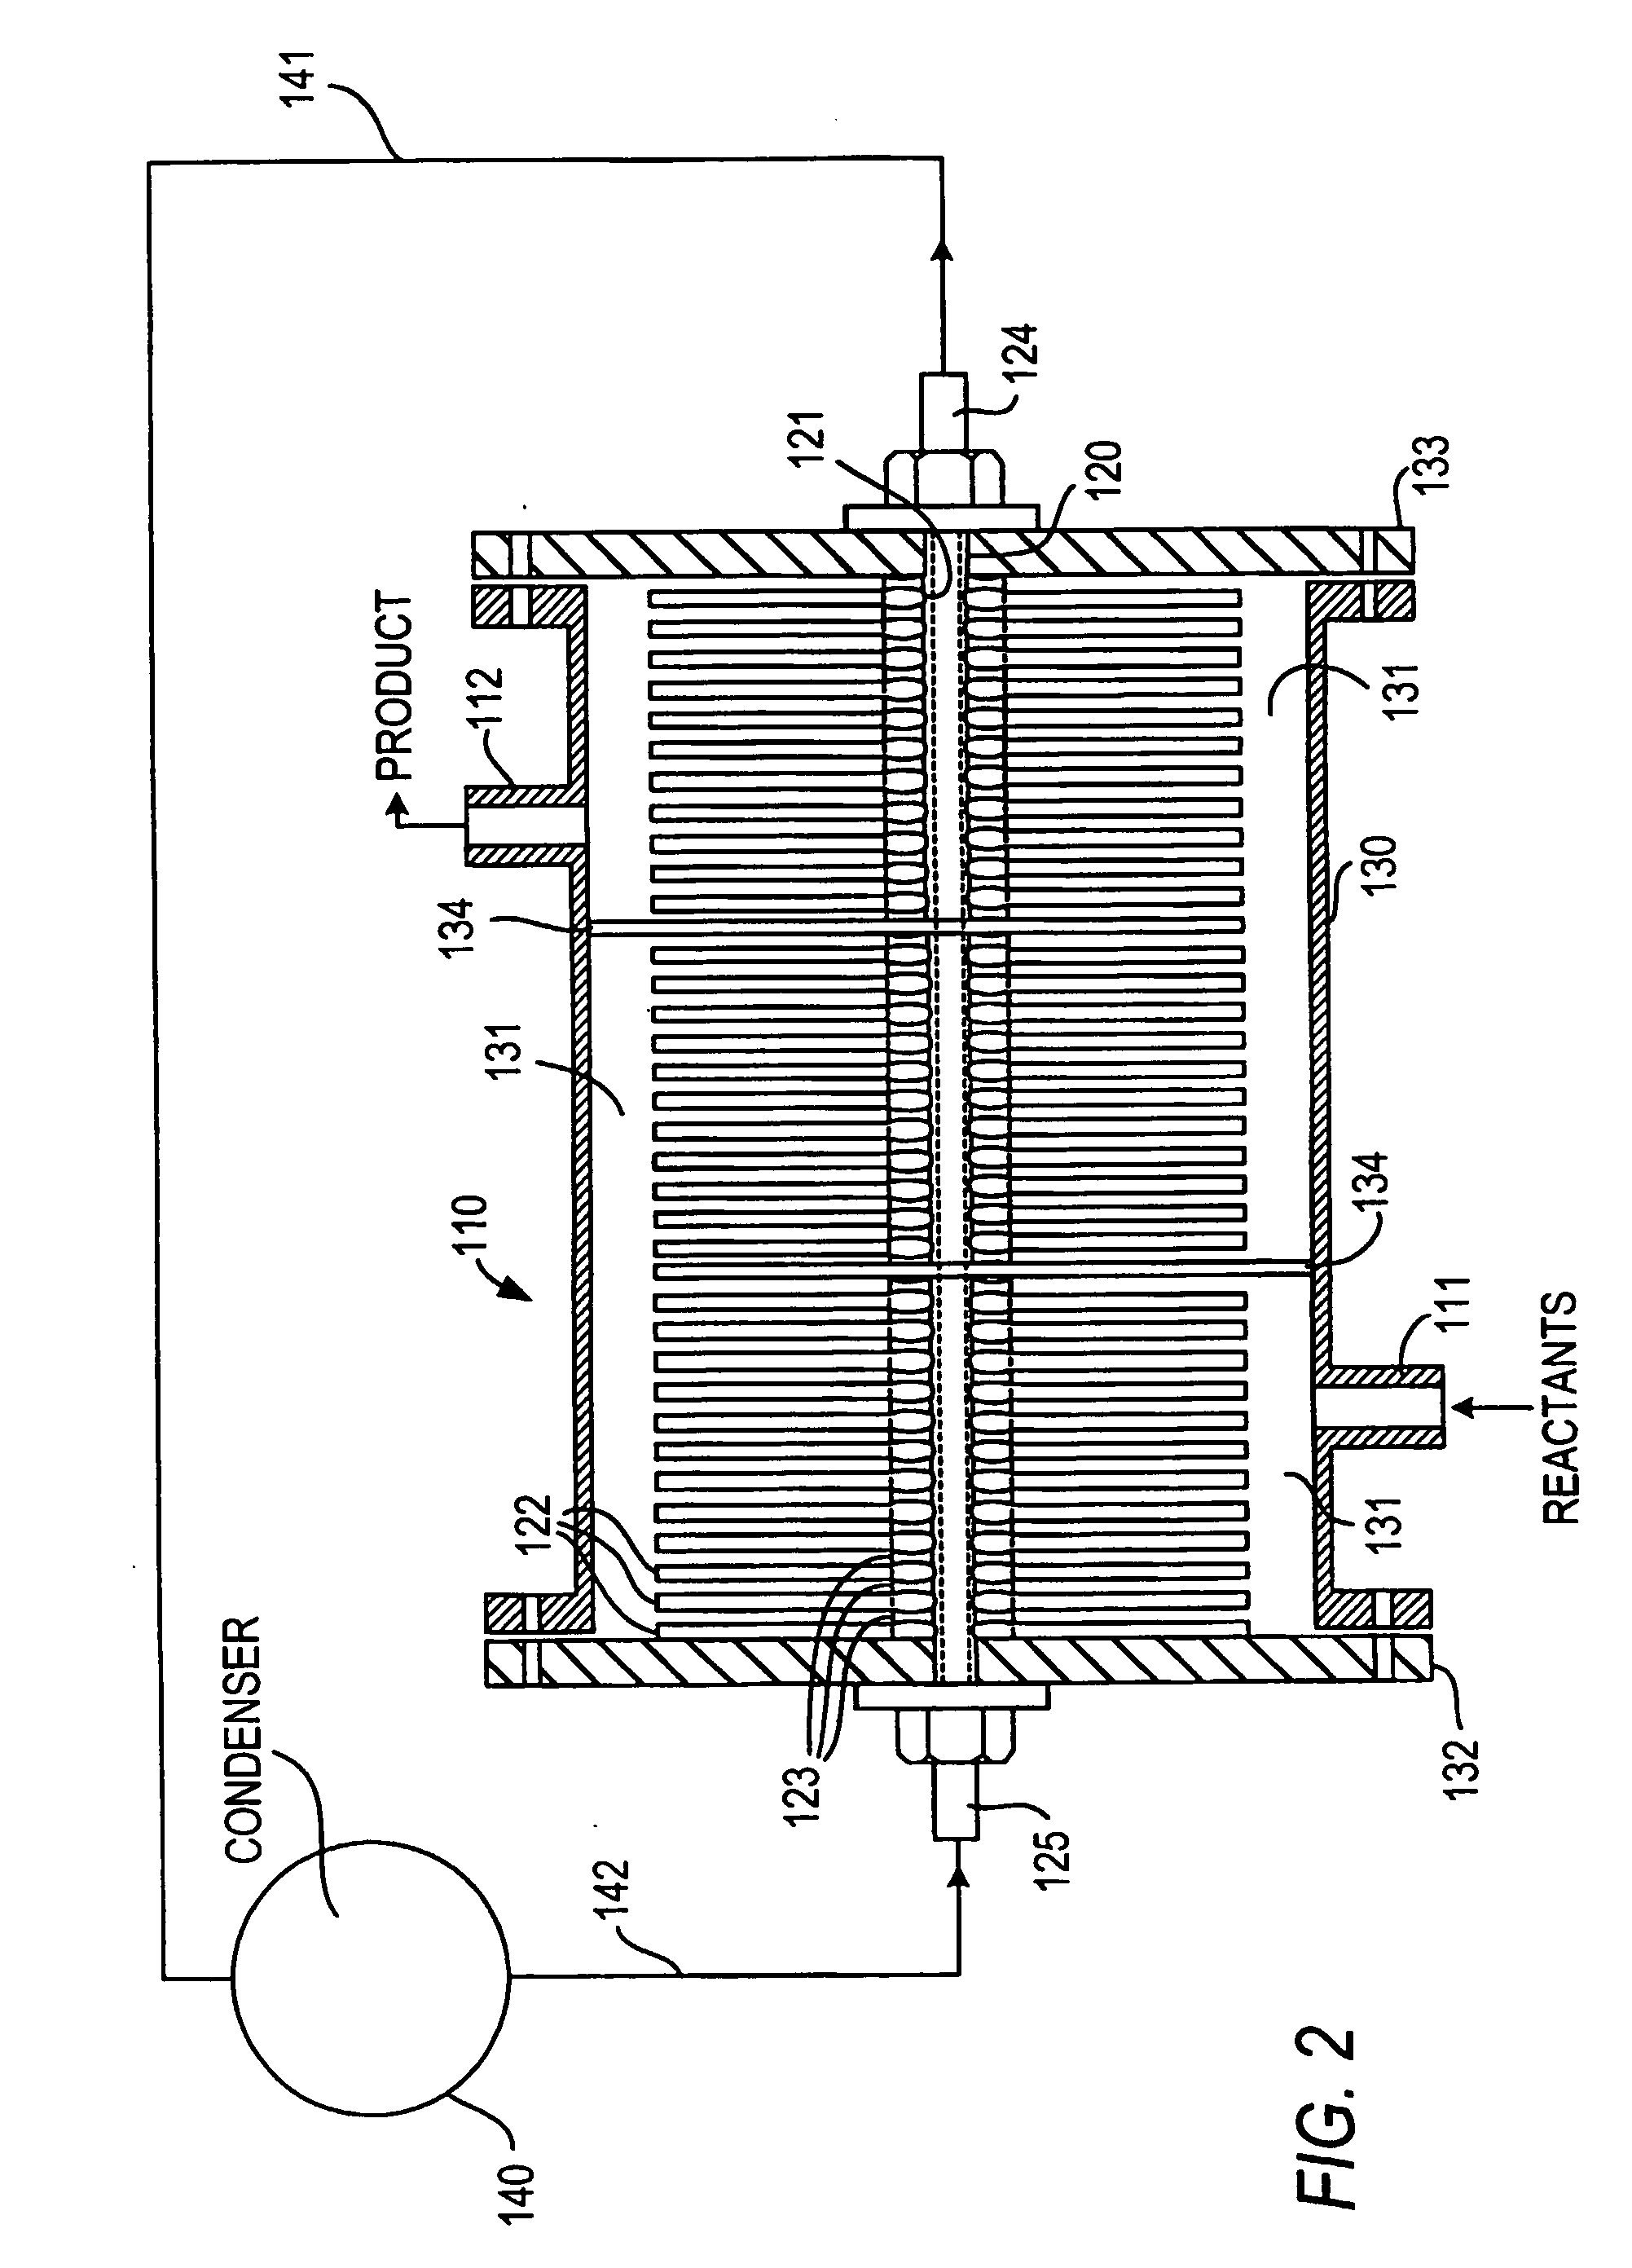 Chemical reactor with heat pipe cooling